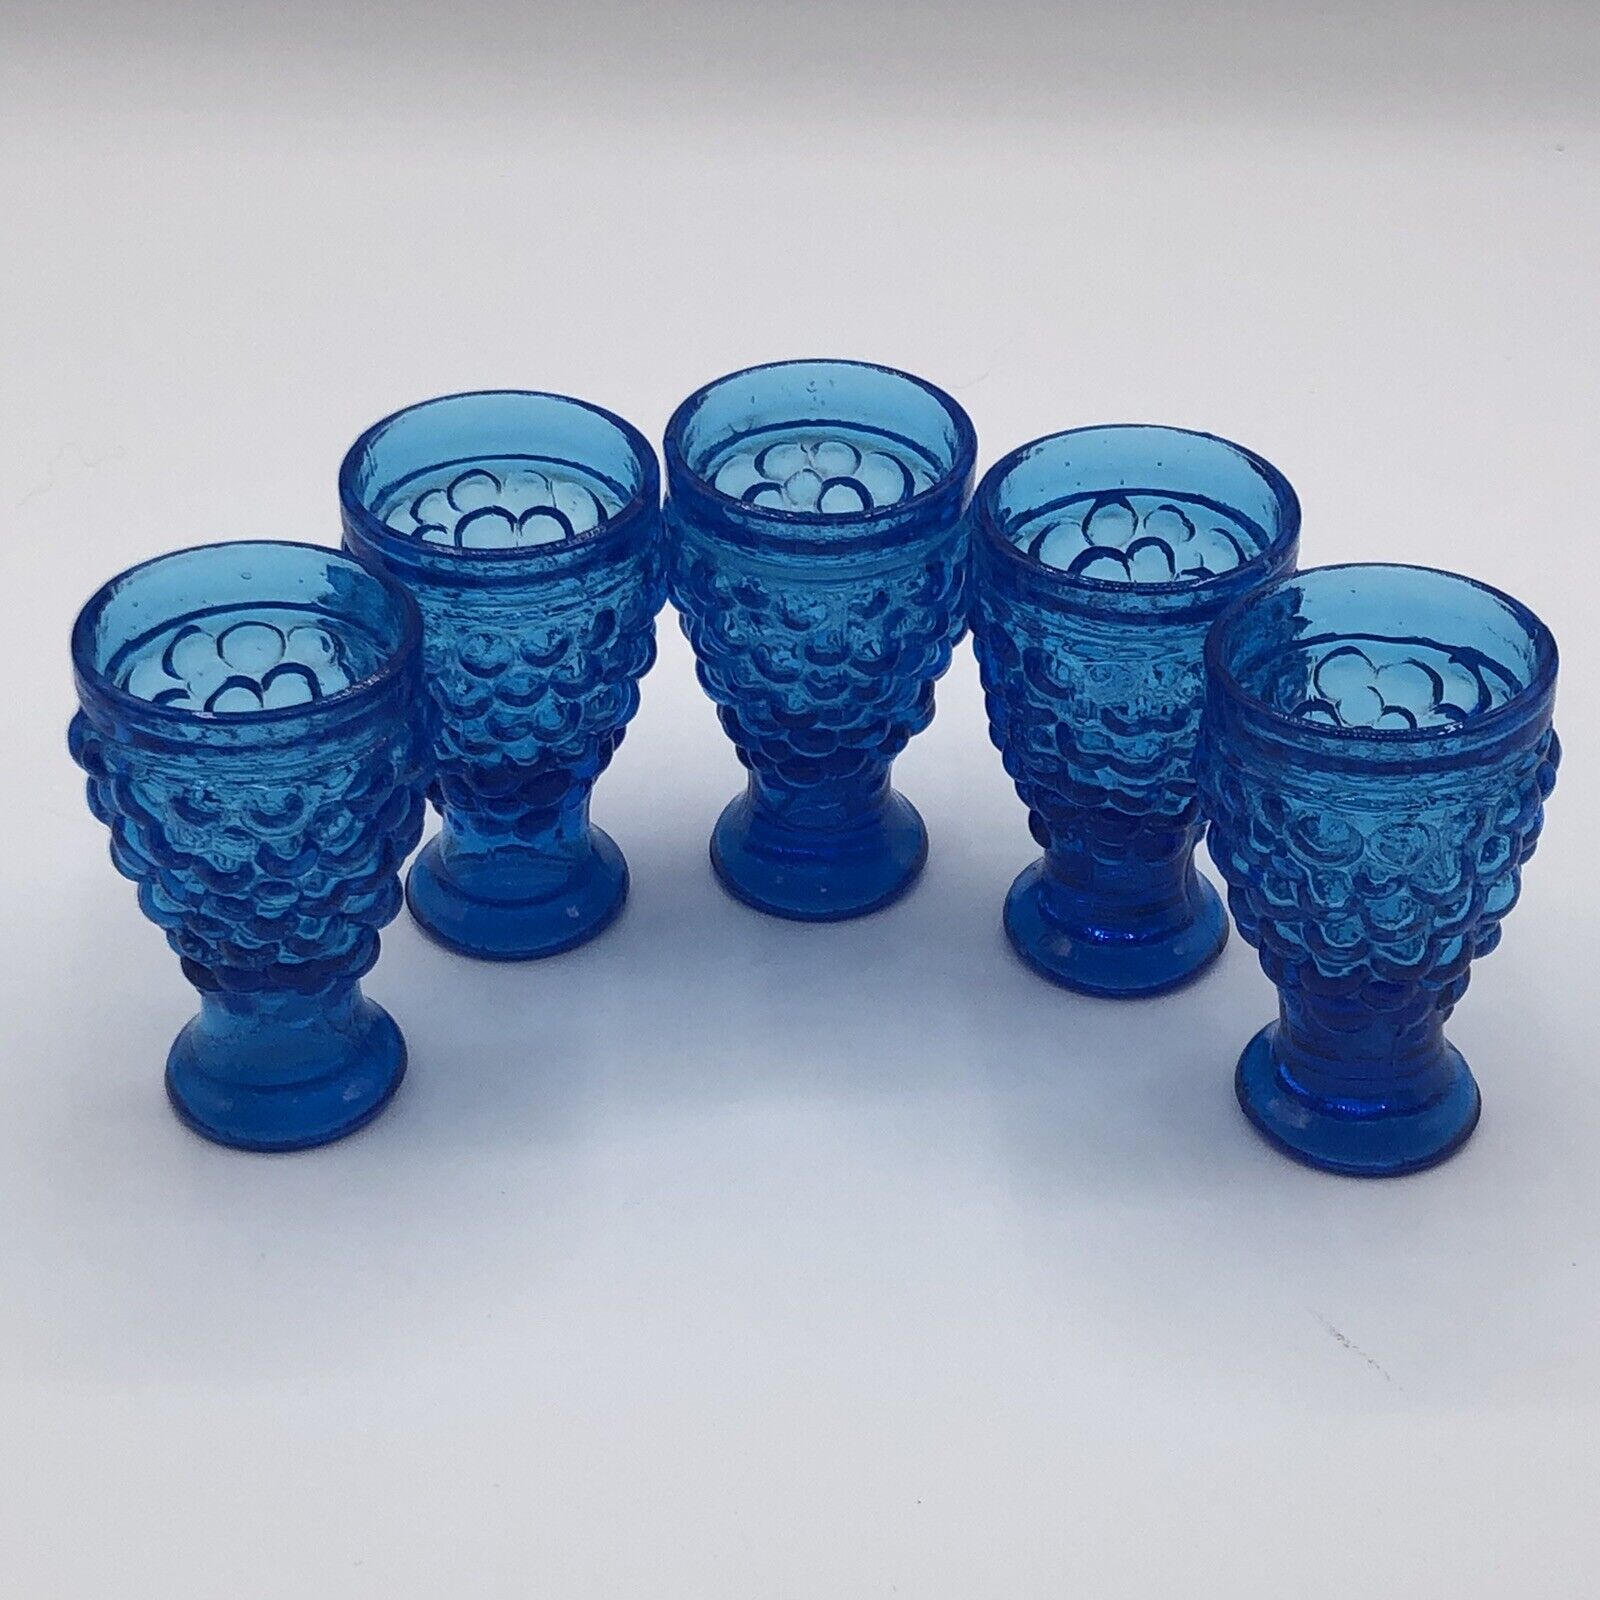 Vintage Set of 5 Blue Aperitif Cups 3” Tall Bar Ware Dinner Service